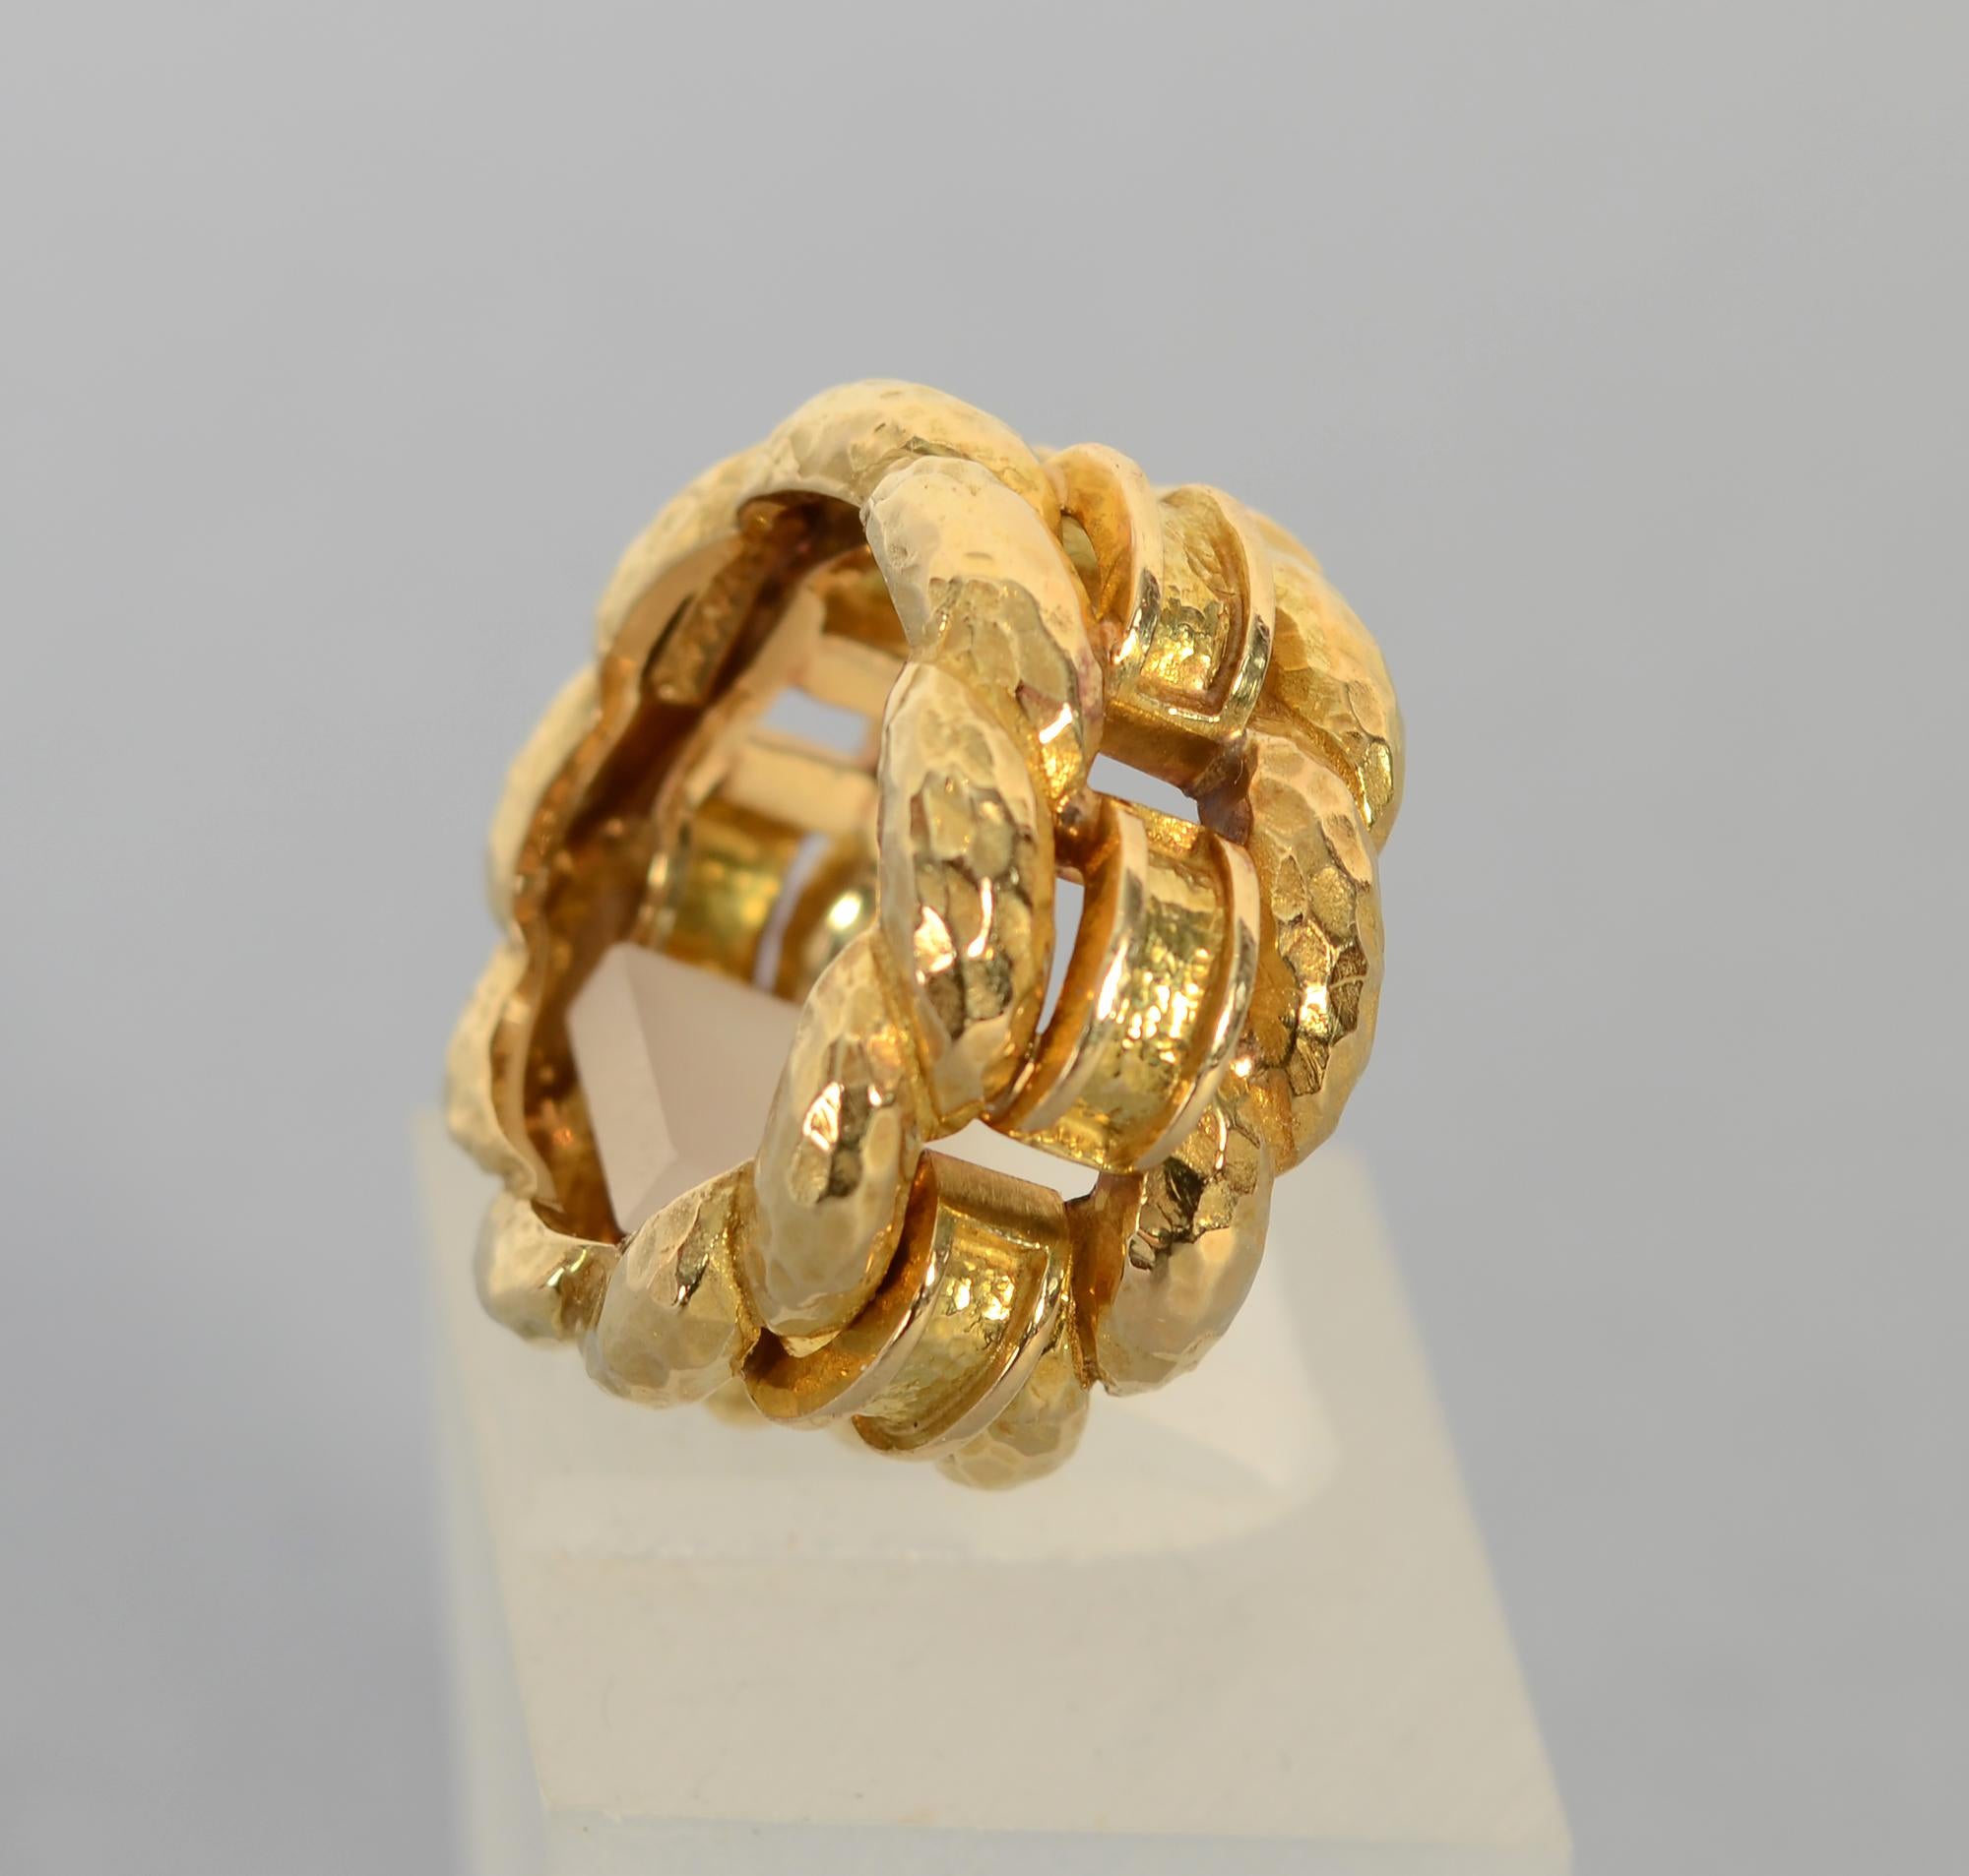 Beautifully made wide woven gold band by David Webb. The entire ring is hammered 18 karat gold. Twisted rope top and bottom flanks rectangular arched links.
The ring is half an inch wide. It is size 6. A jeweler can put balls gold inside to make it